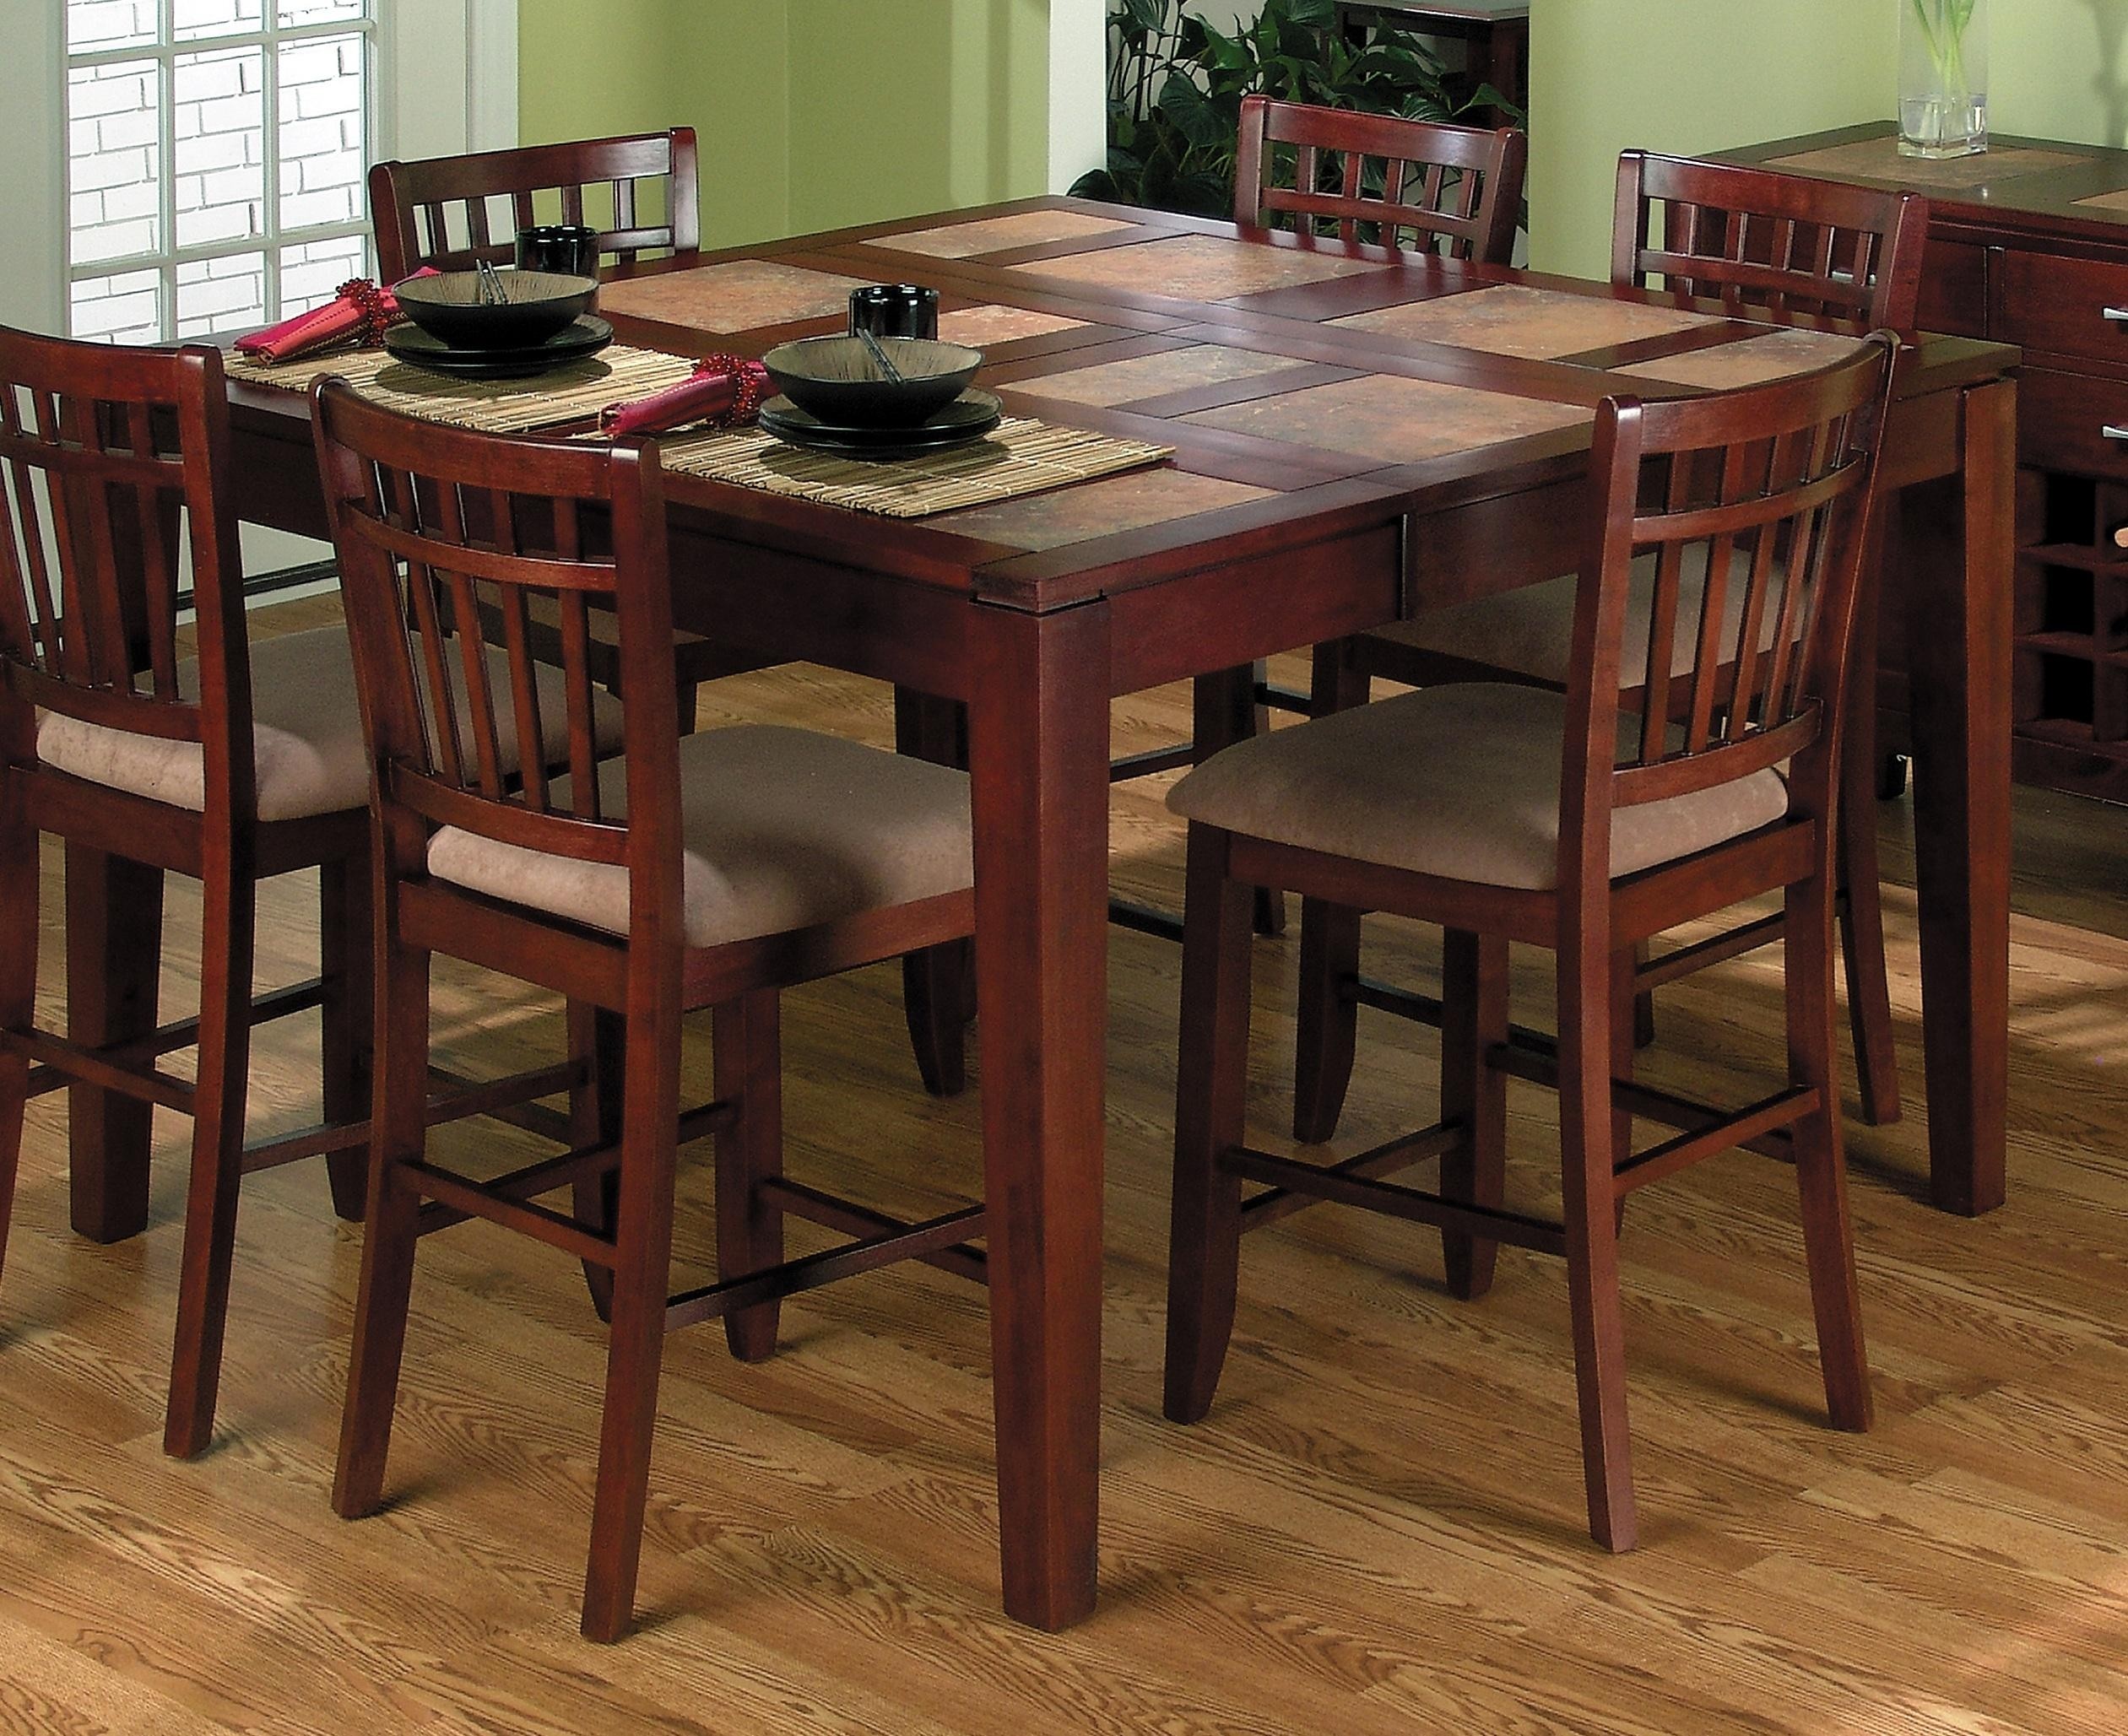 High top kitchen table sets homesfeed 2